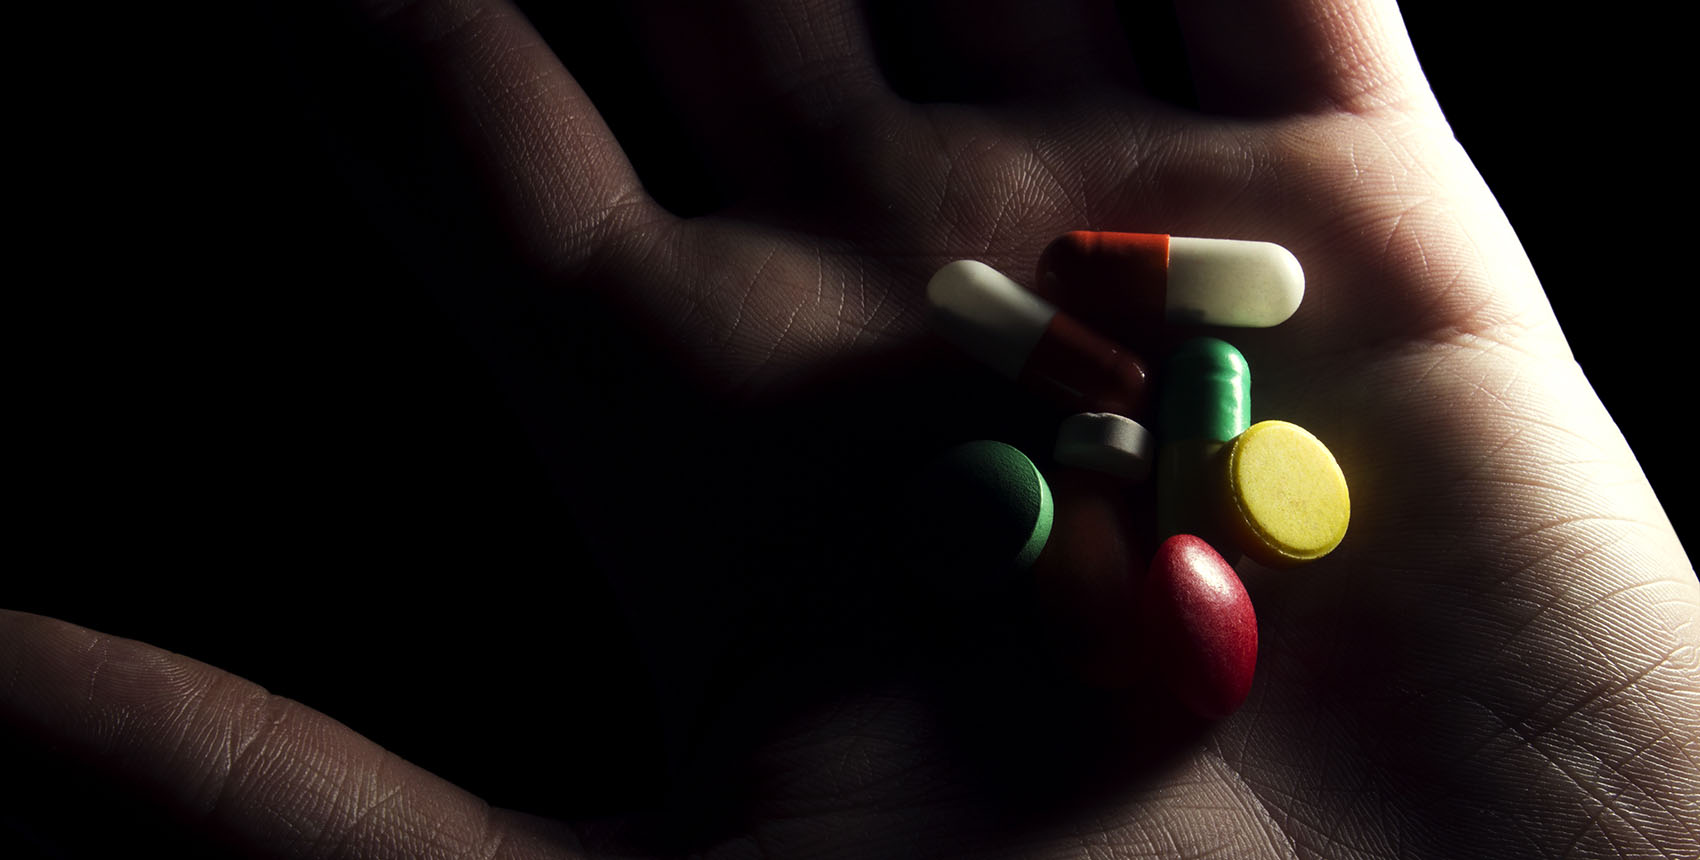 A shadowy hand holds a variety of pills.